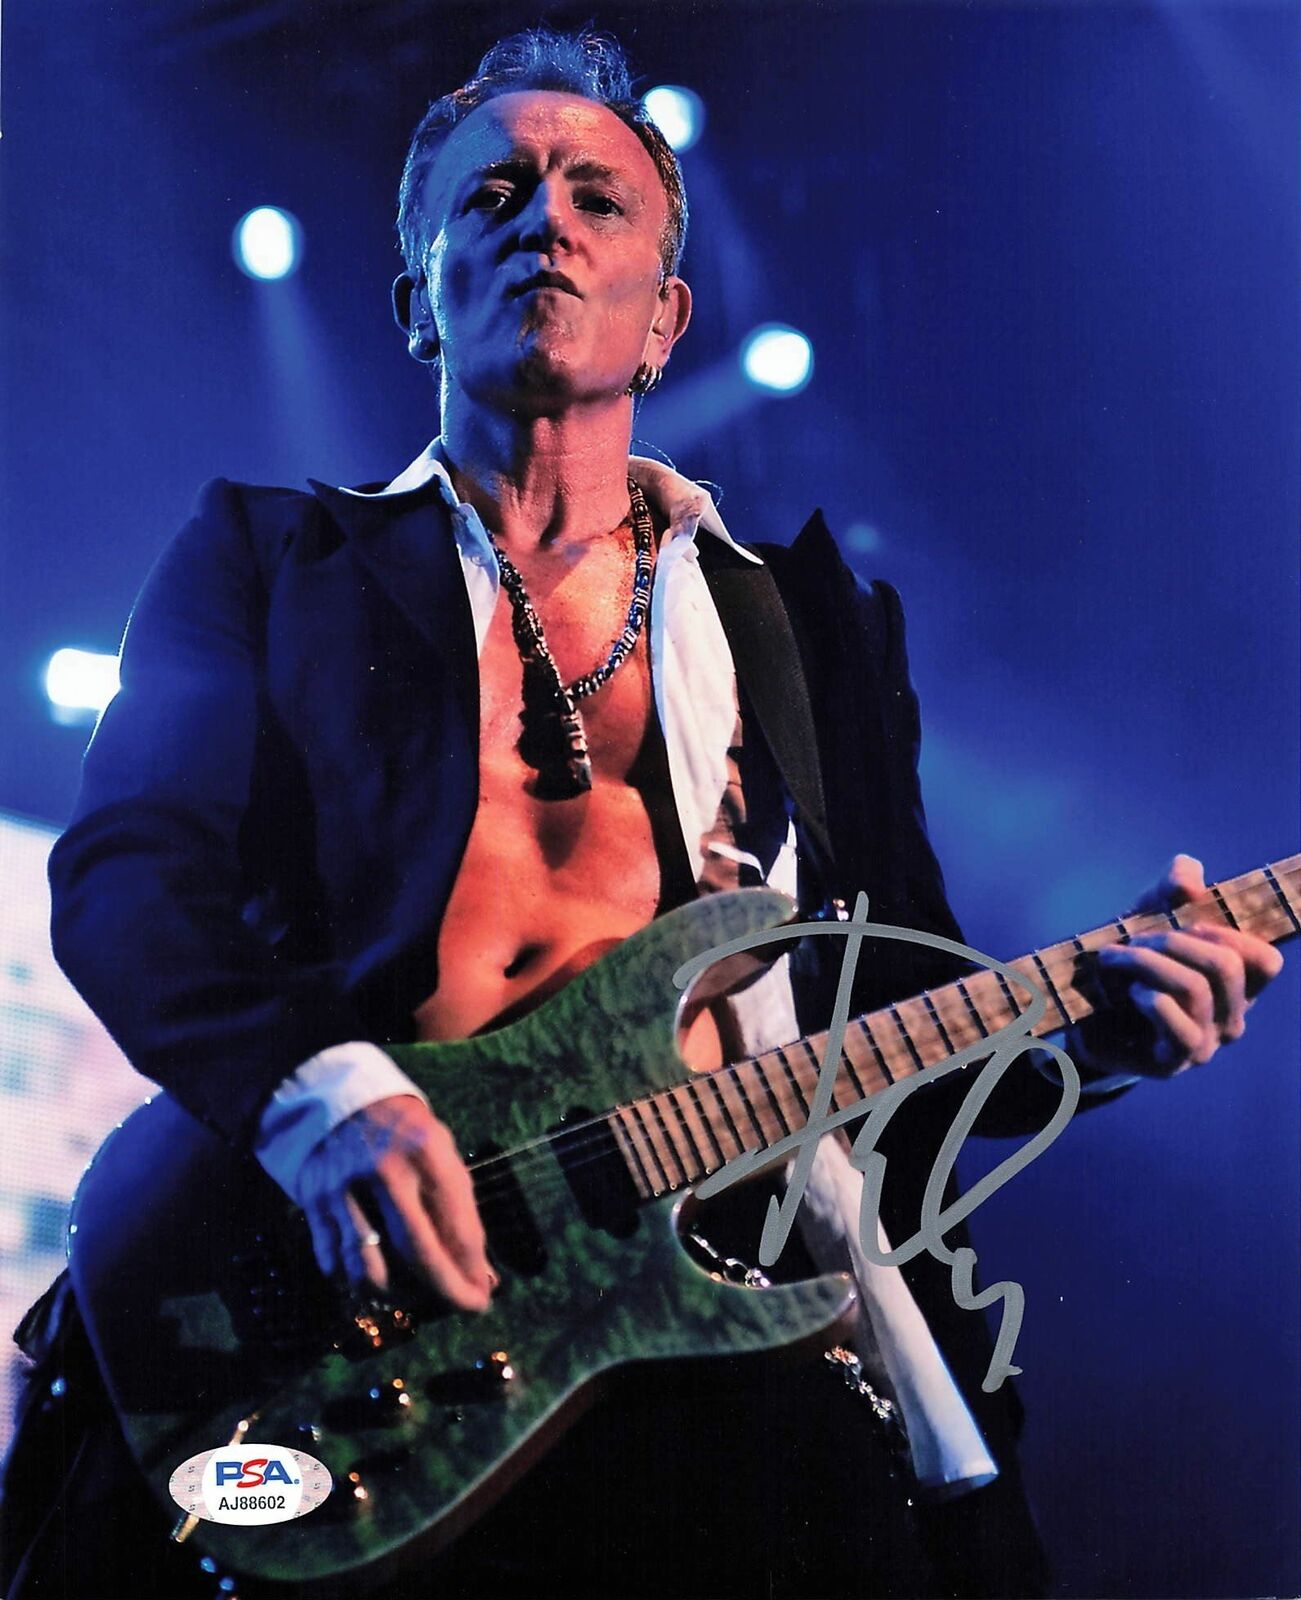 PHIL COLLEN signed 8x10 Photo Poster painting PSA/DNA Autographed Def Leppard